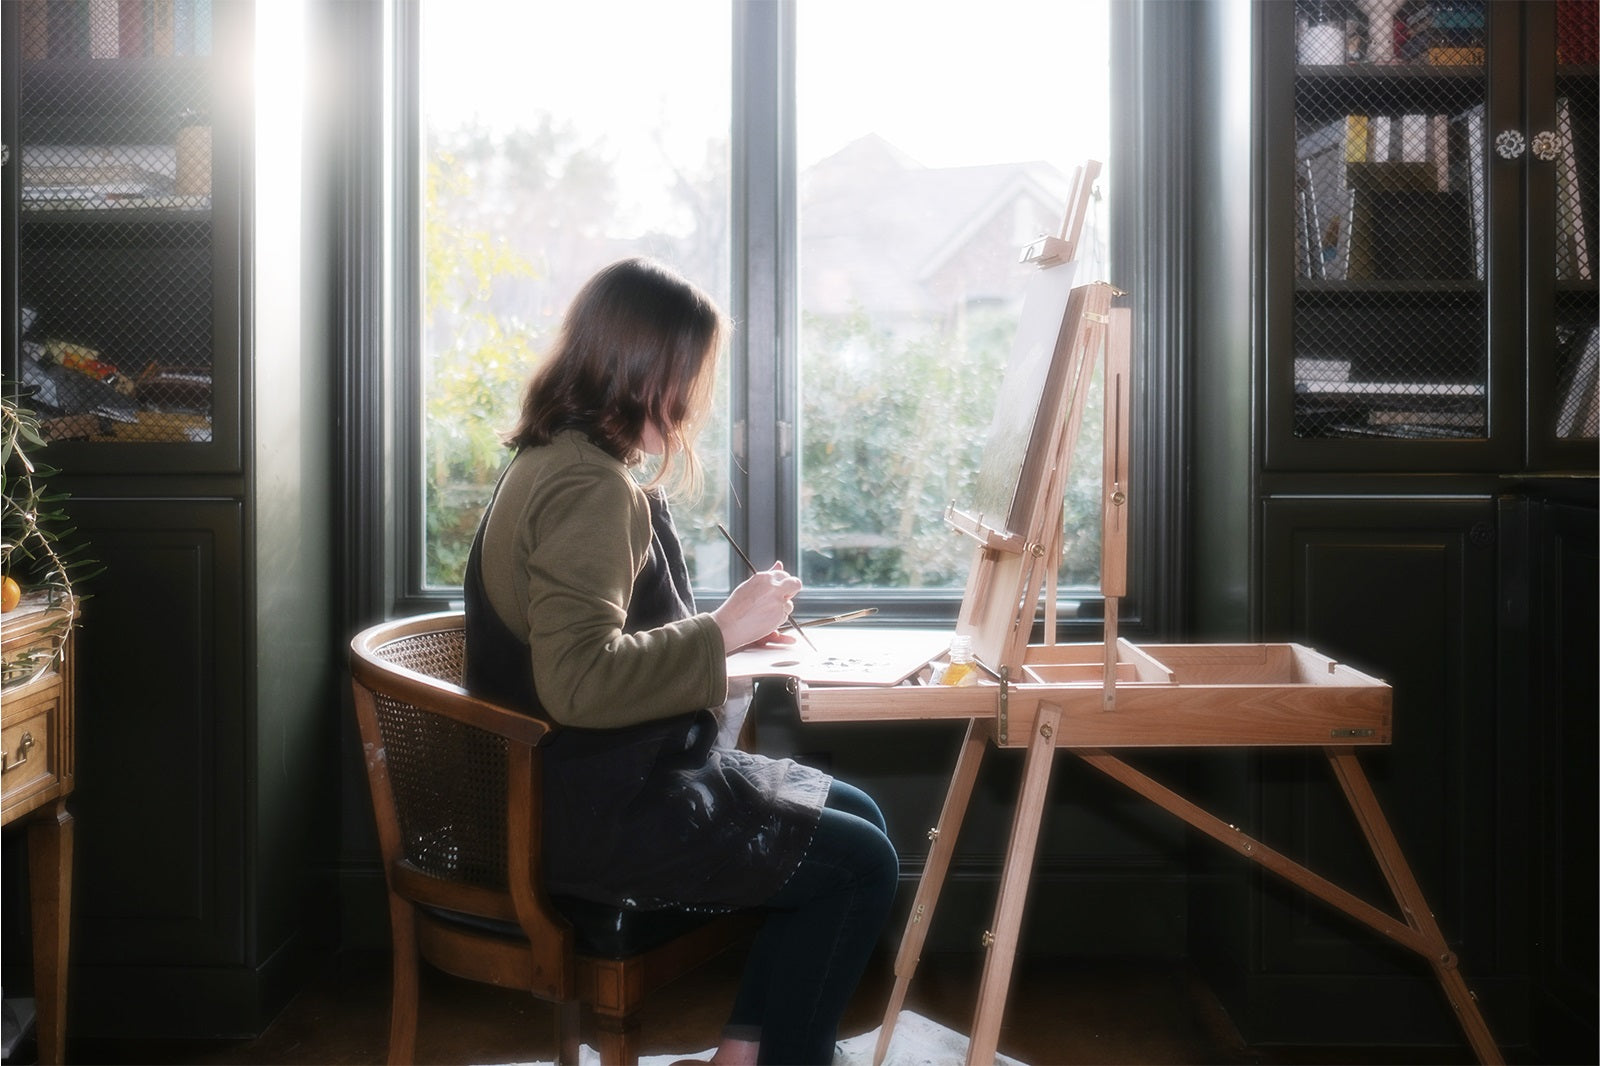 A woman sitting on a chair besides a window with drawing brushes in her hands painting on a canvas